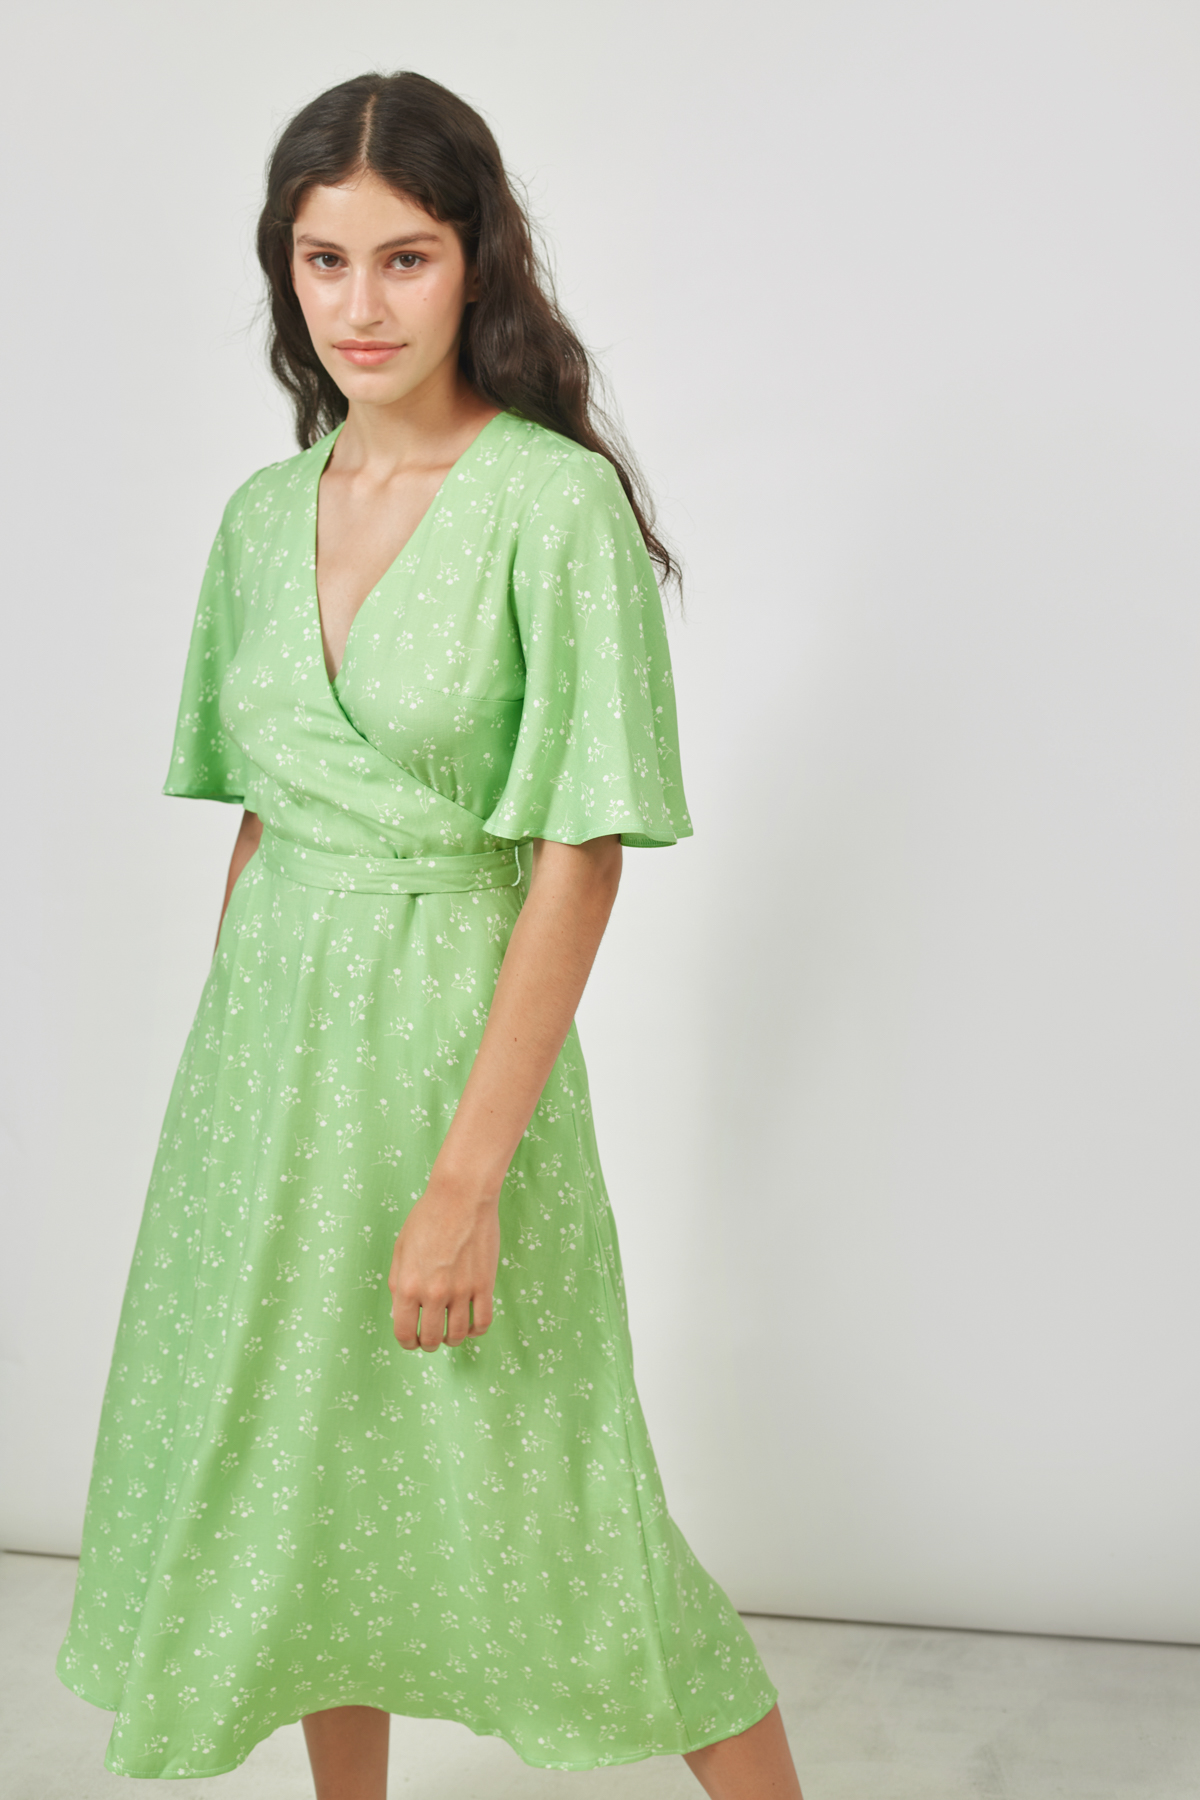 Midi dress in mint viscose with floral print, photo 2